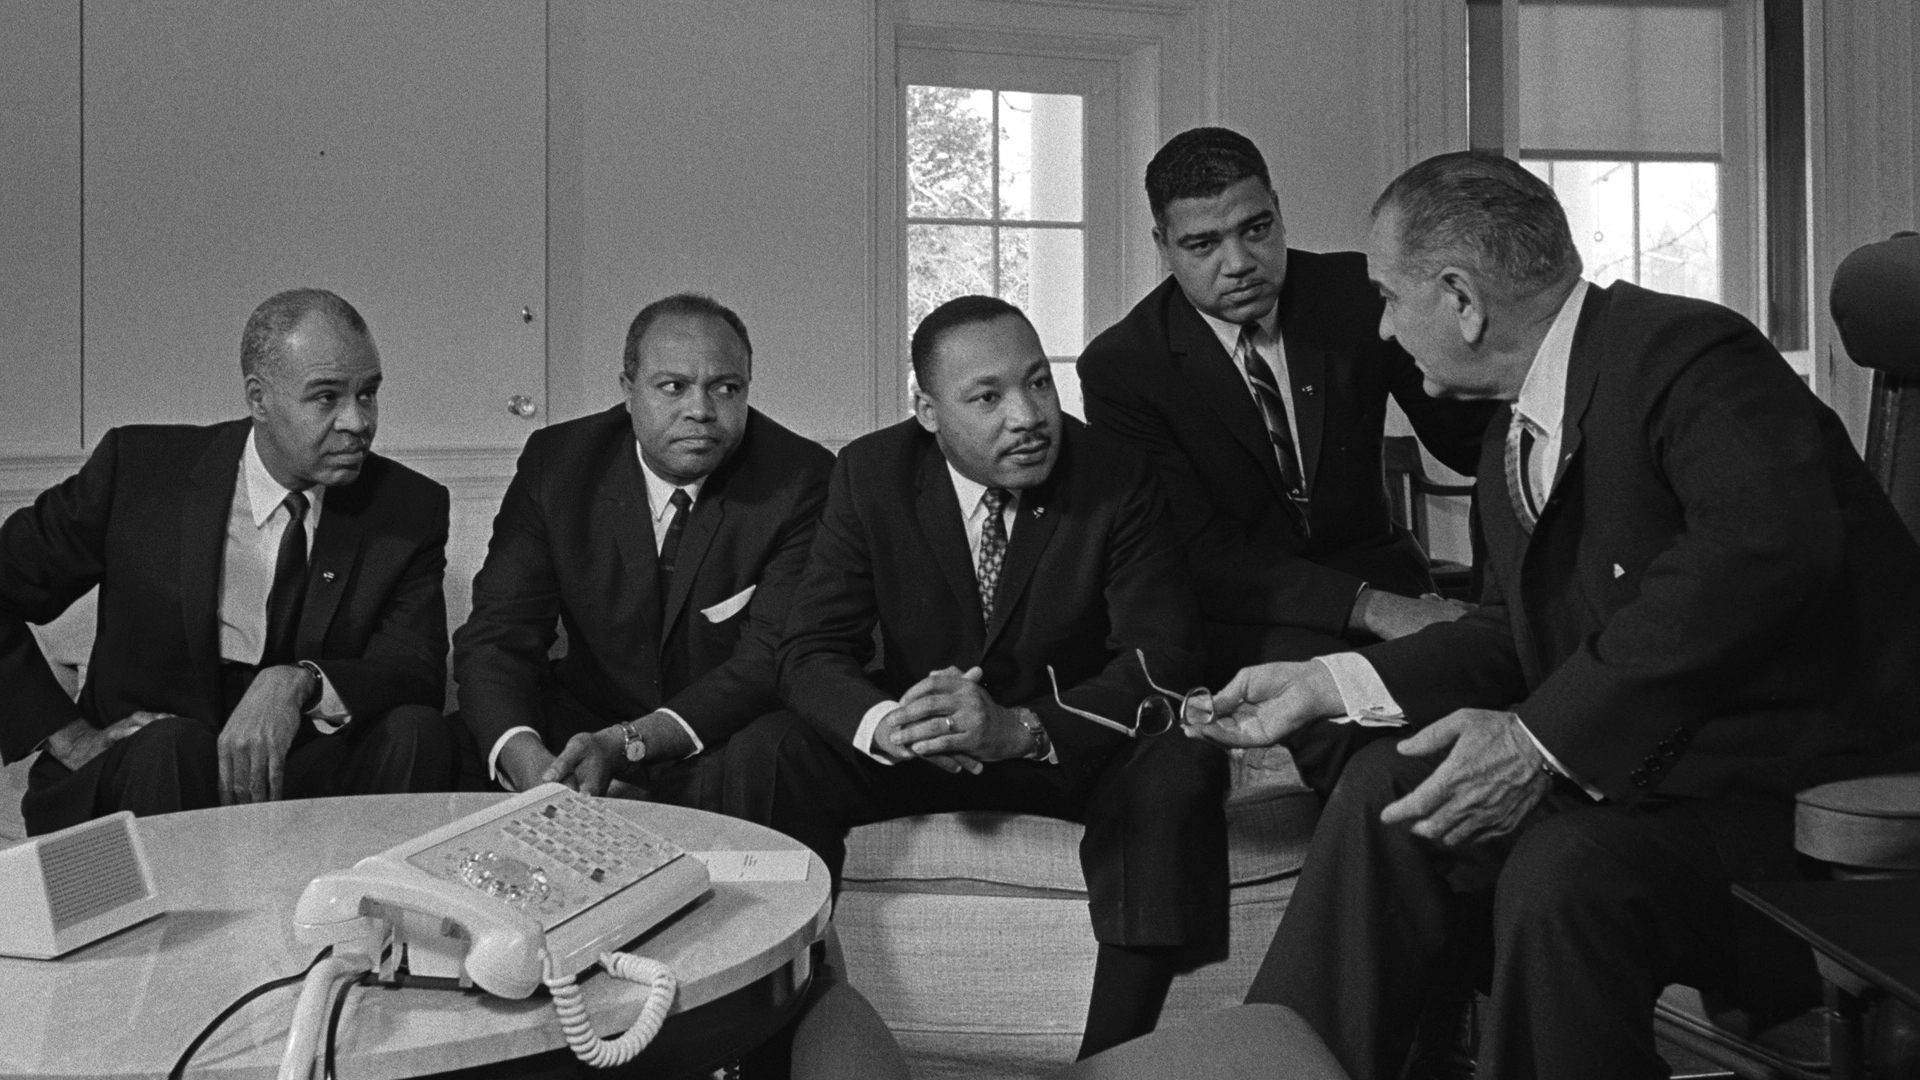 Florida Conversations: The Civil Rights Act of 1964